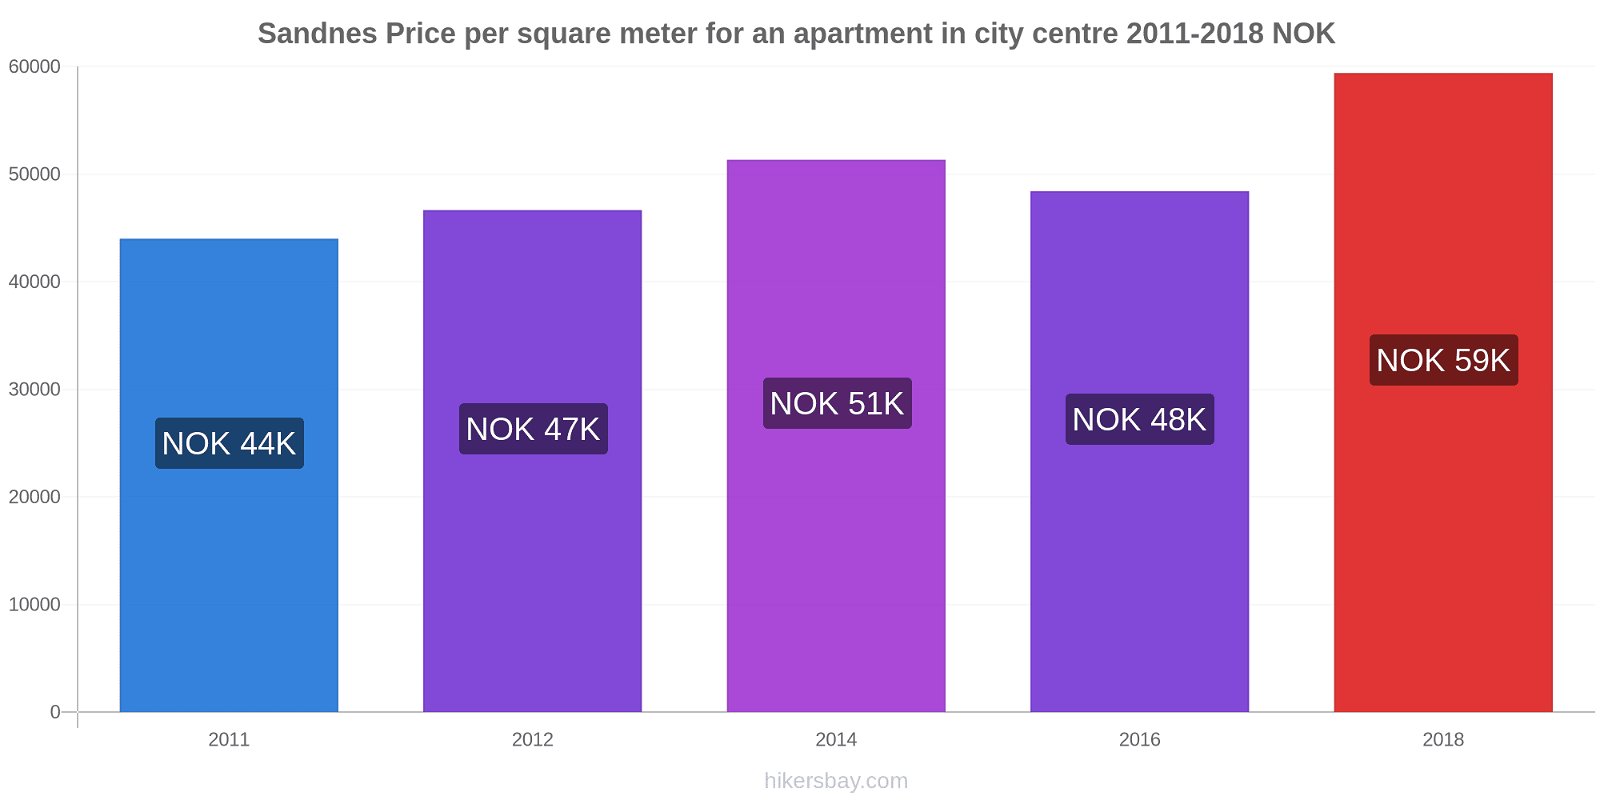 Sandnes price changes Price per square meter for an apartment in city centre hikersbay.com